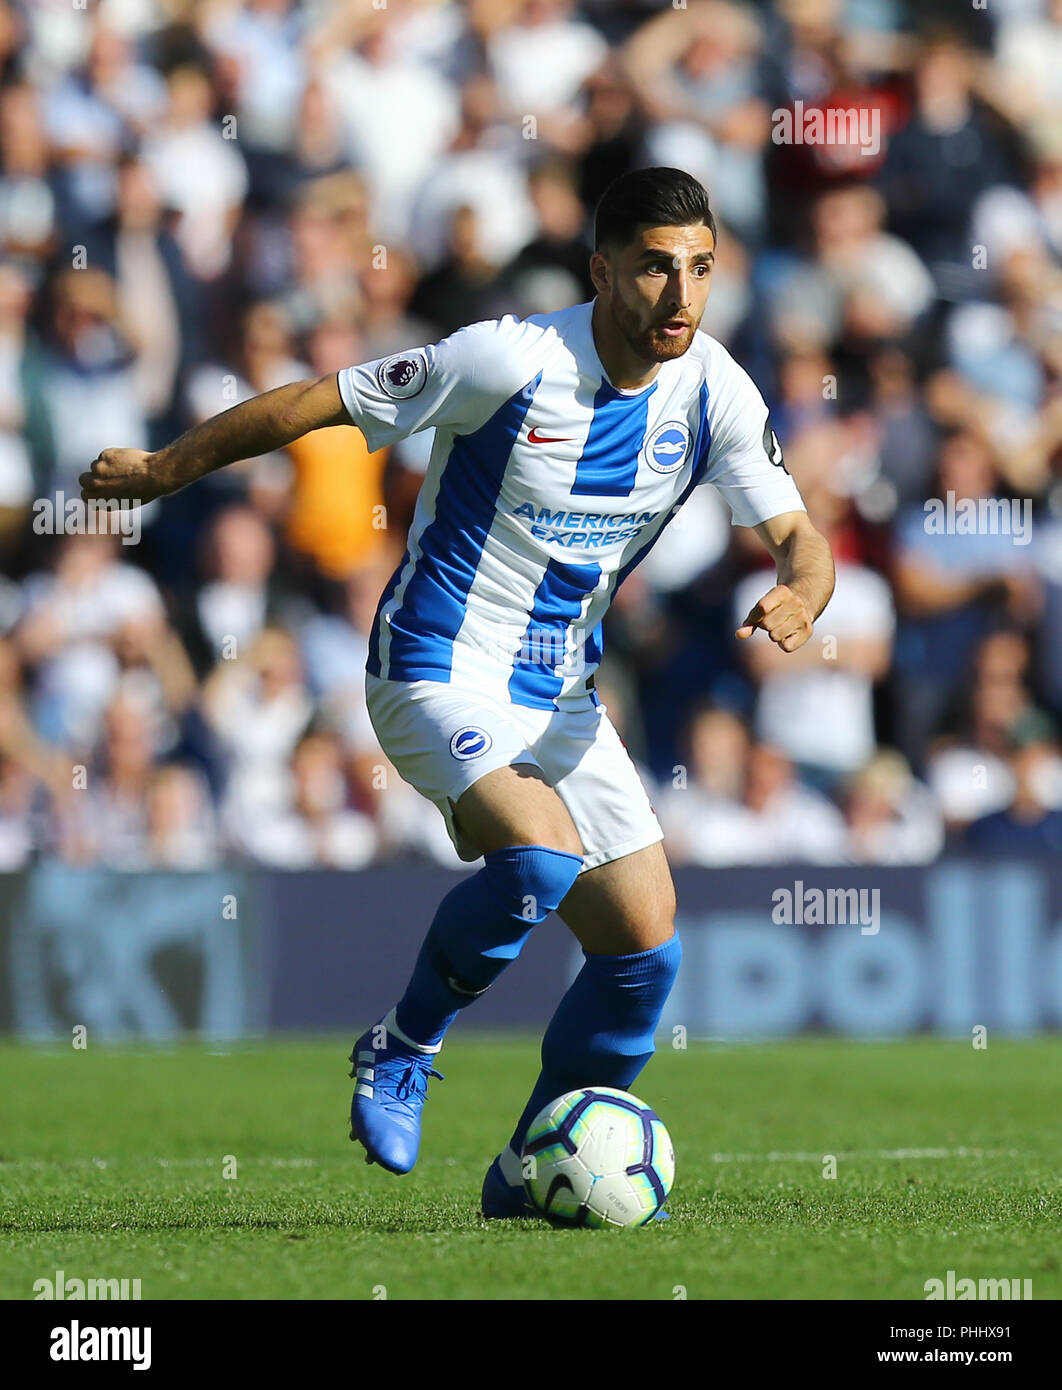 Brighton & Hove Albion's Alireza Jahanbakhsh during the Premier League match at the AMEX Stadium, Brighton. PRESS ASSOCIATION Photo. Picture date: Saturday September 1, 2018. See PA story SOCCER Brighton. Photo credit should read: Gareth Fuller/PA Wire. RESTRICTIONS: No use with unauthorised audio, video, data, fixture lists, club/league logos or 'live' services. Online in-match use limited to 120 images, no video emulation. No use in betting, games or single club/league/player publications. Stock Photo